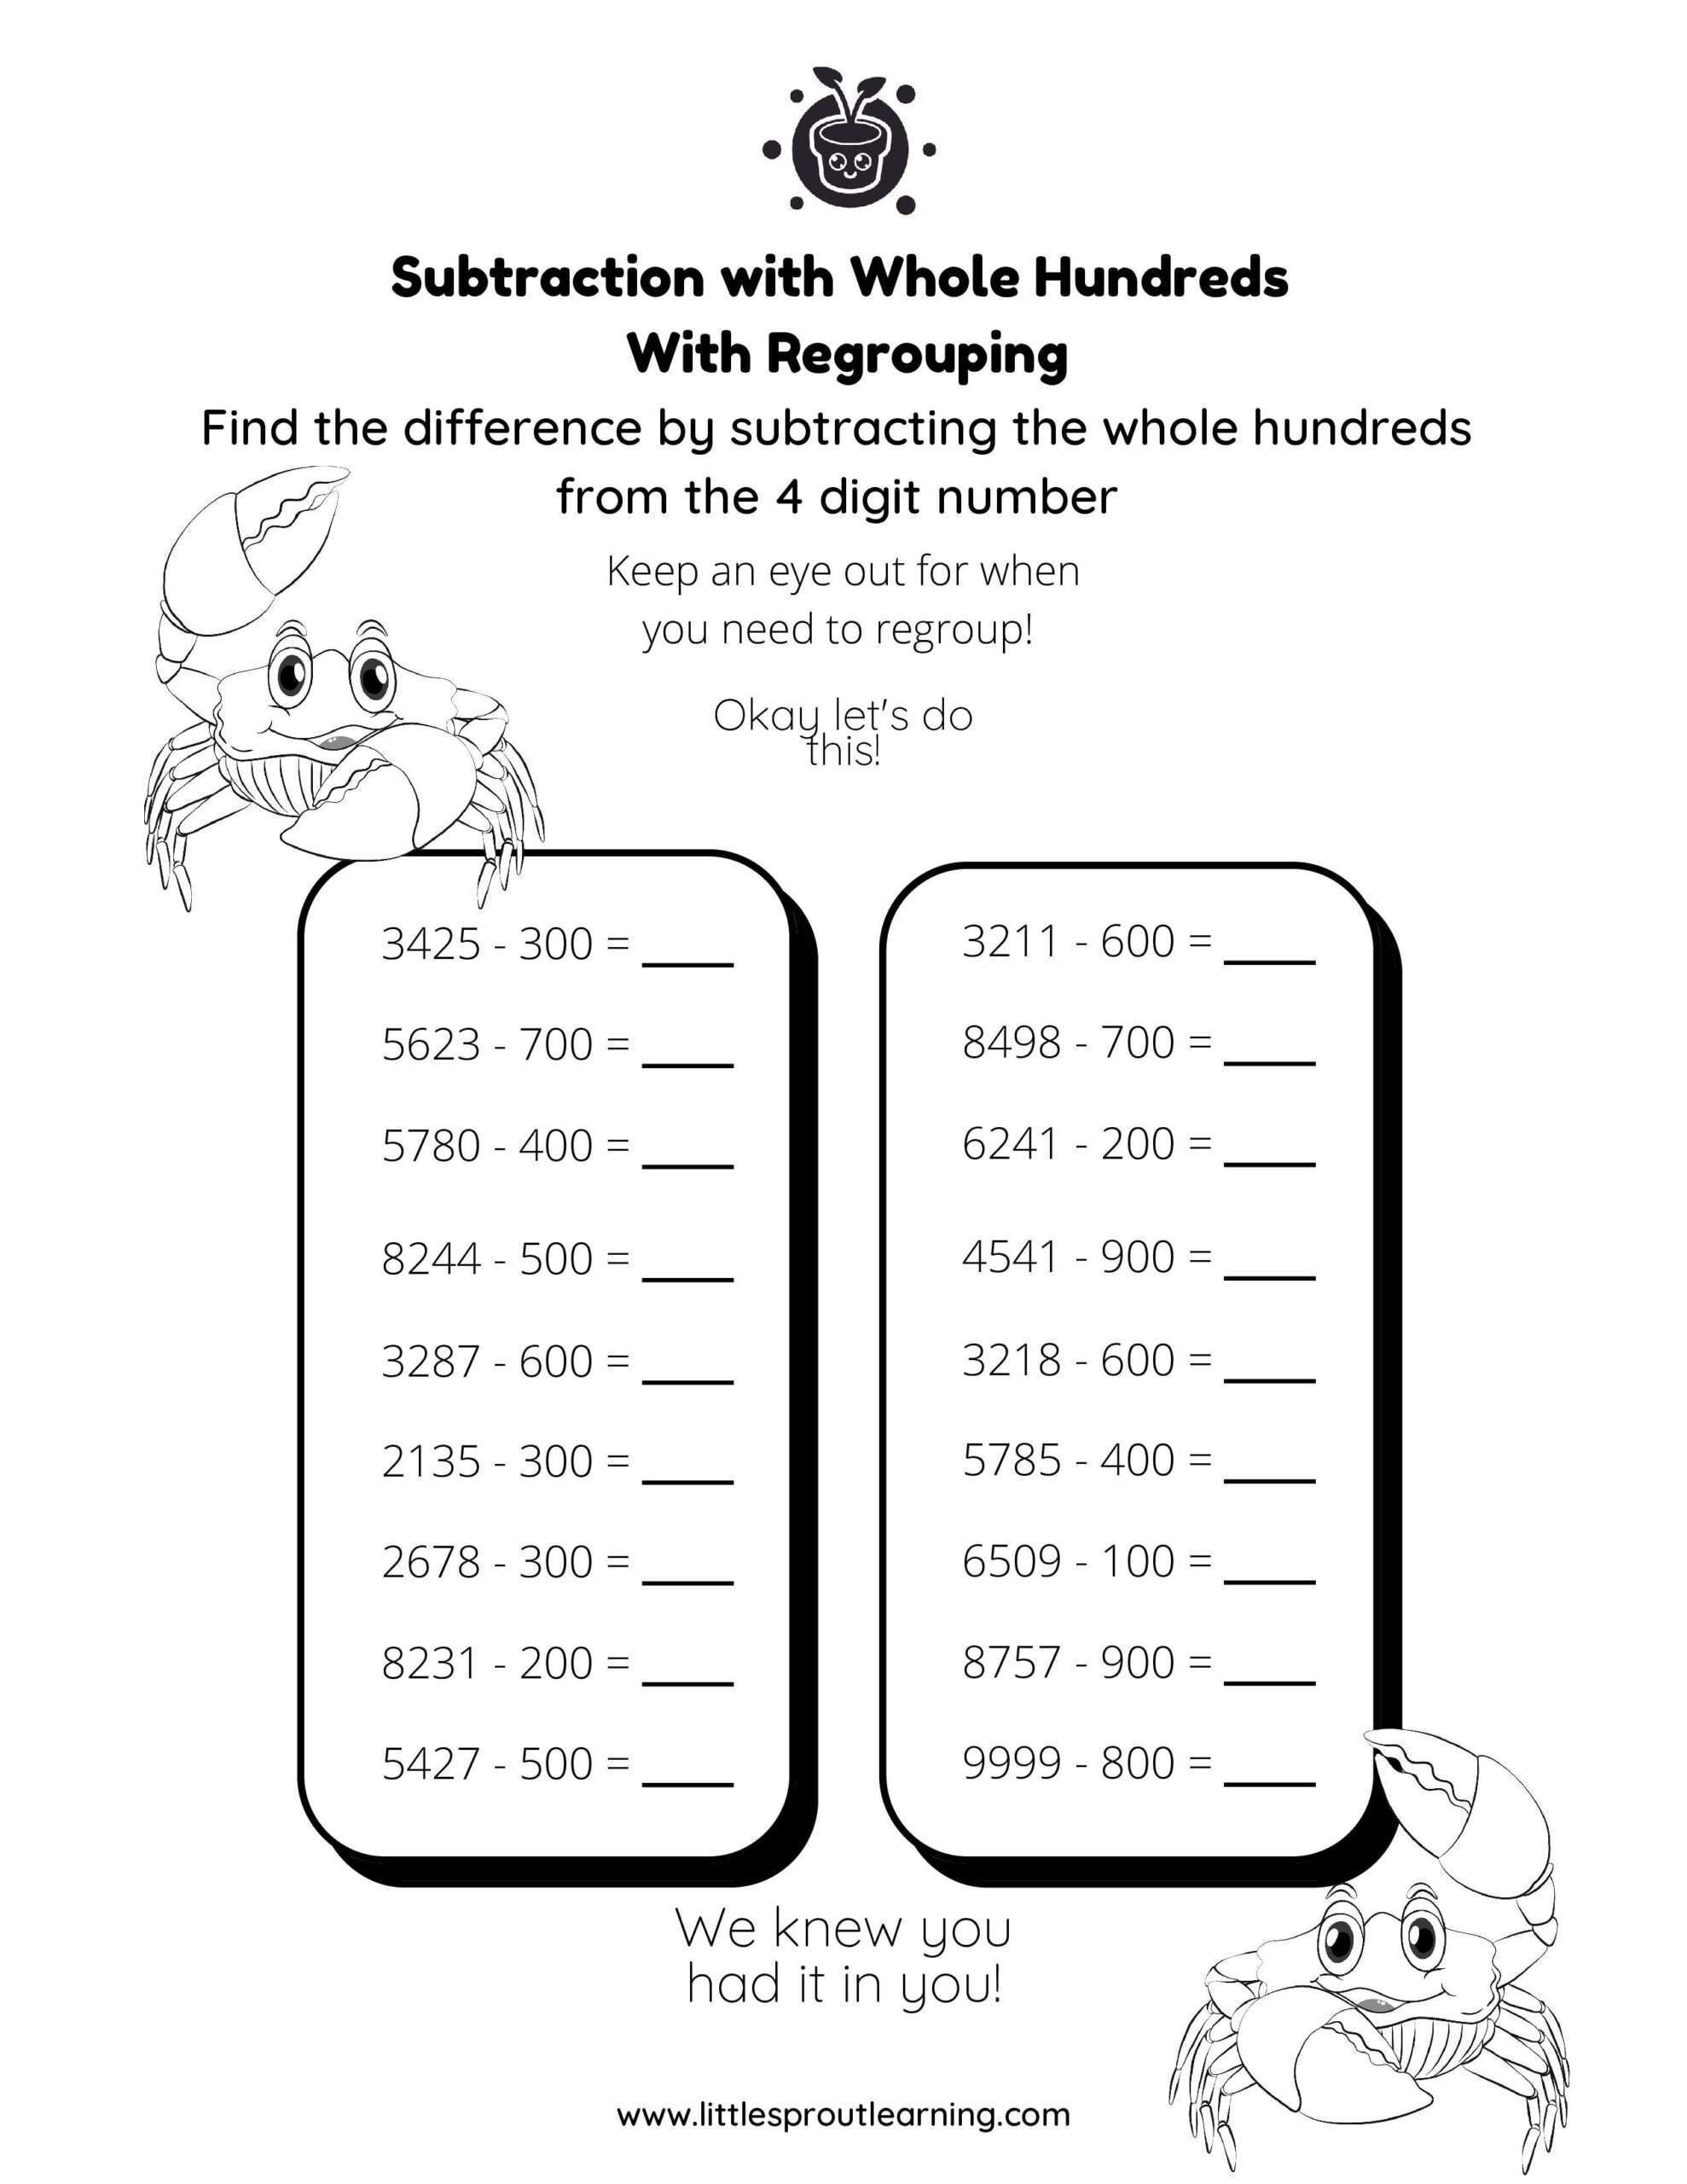 Subtraction With Whole hundreds from 4 Digit Numbers